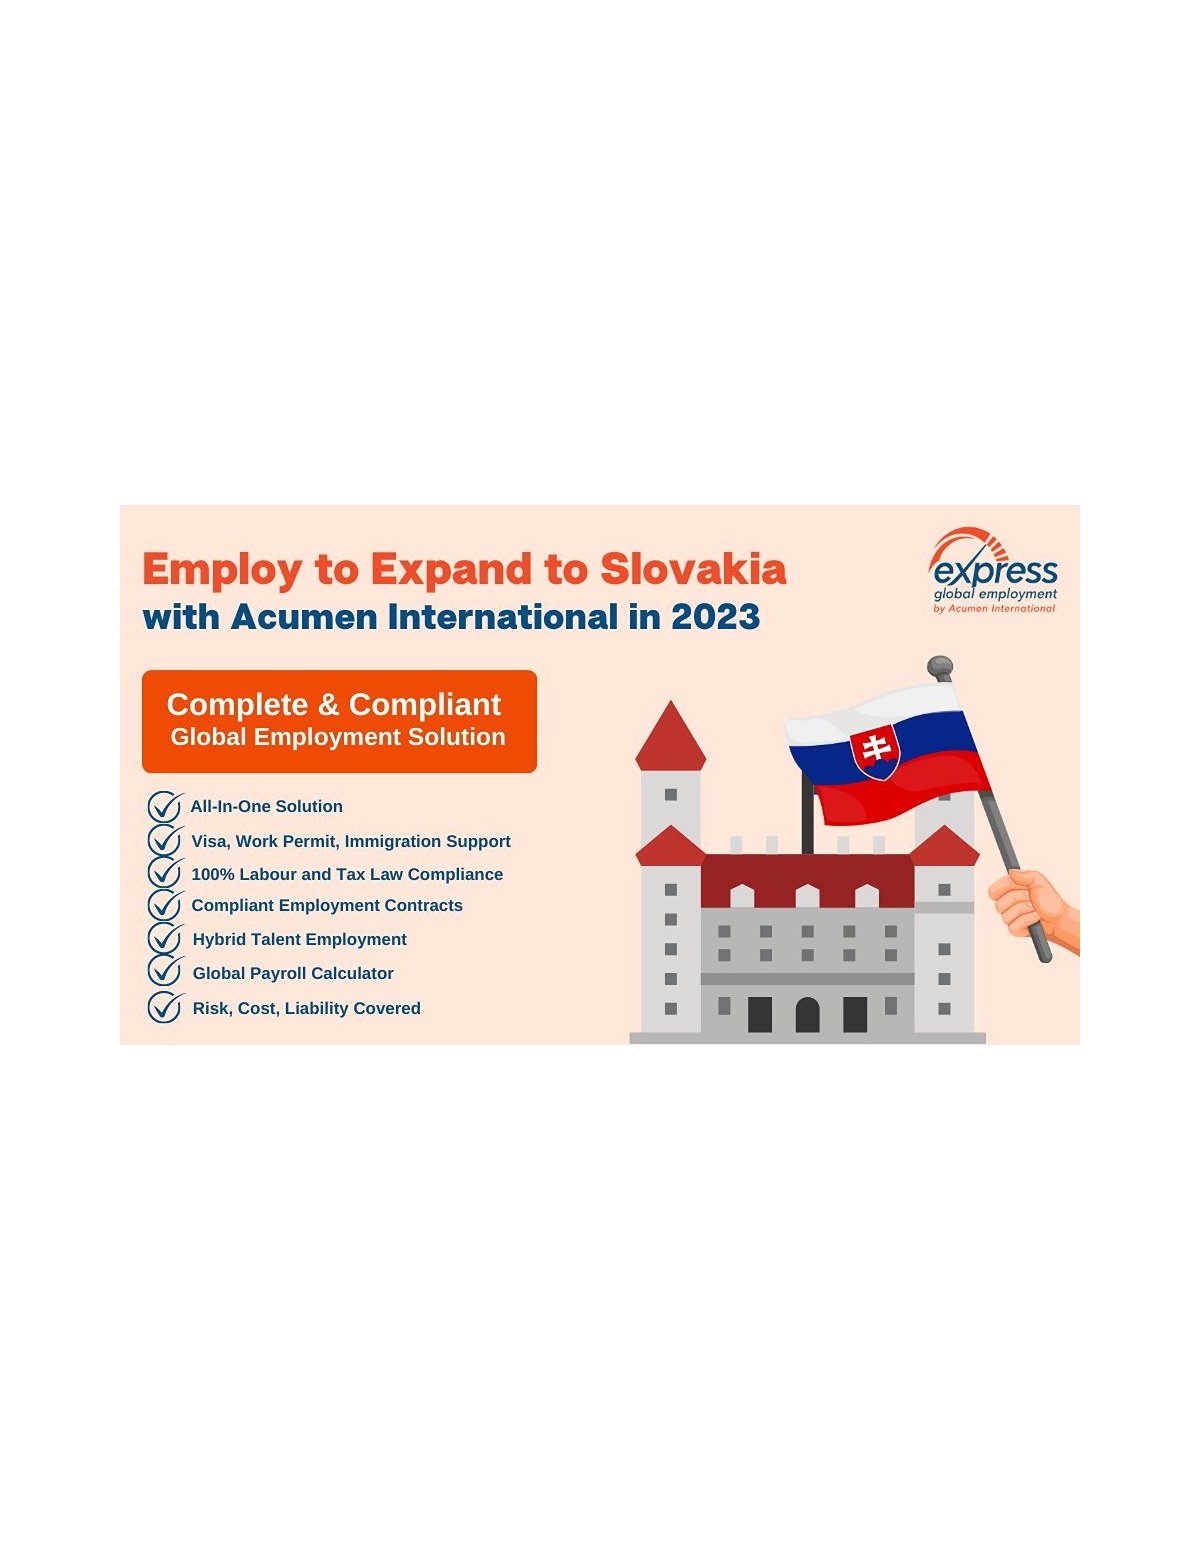 Hire Global Employees quickly to Expand to Slovakia in 2023 with Acumen International